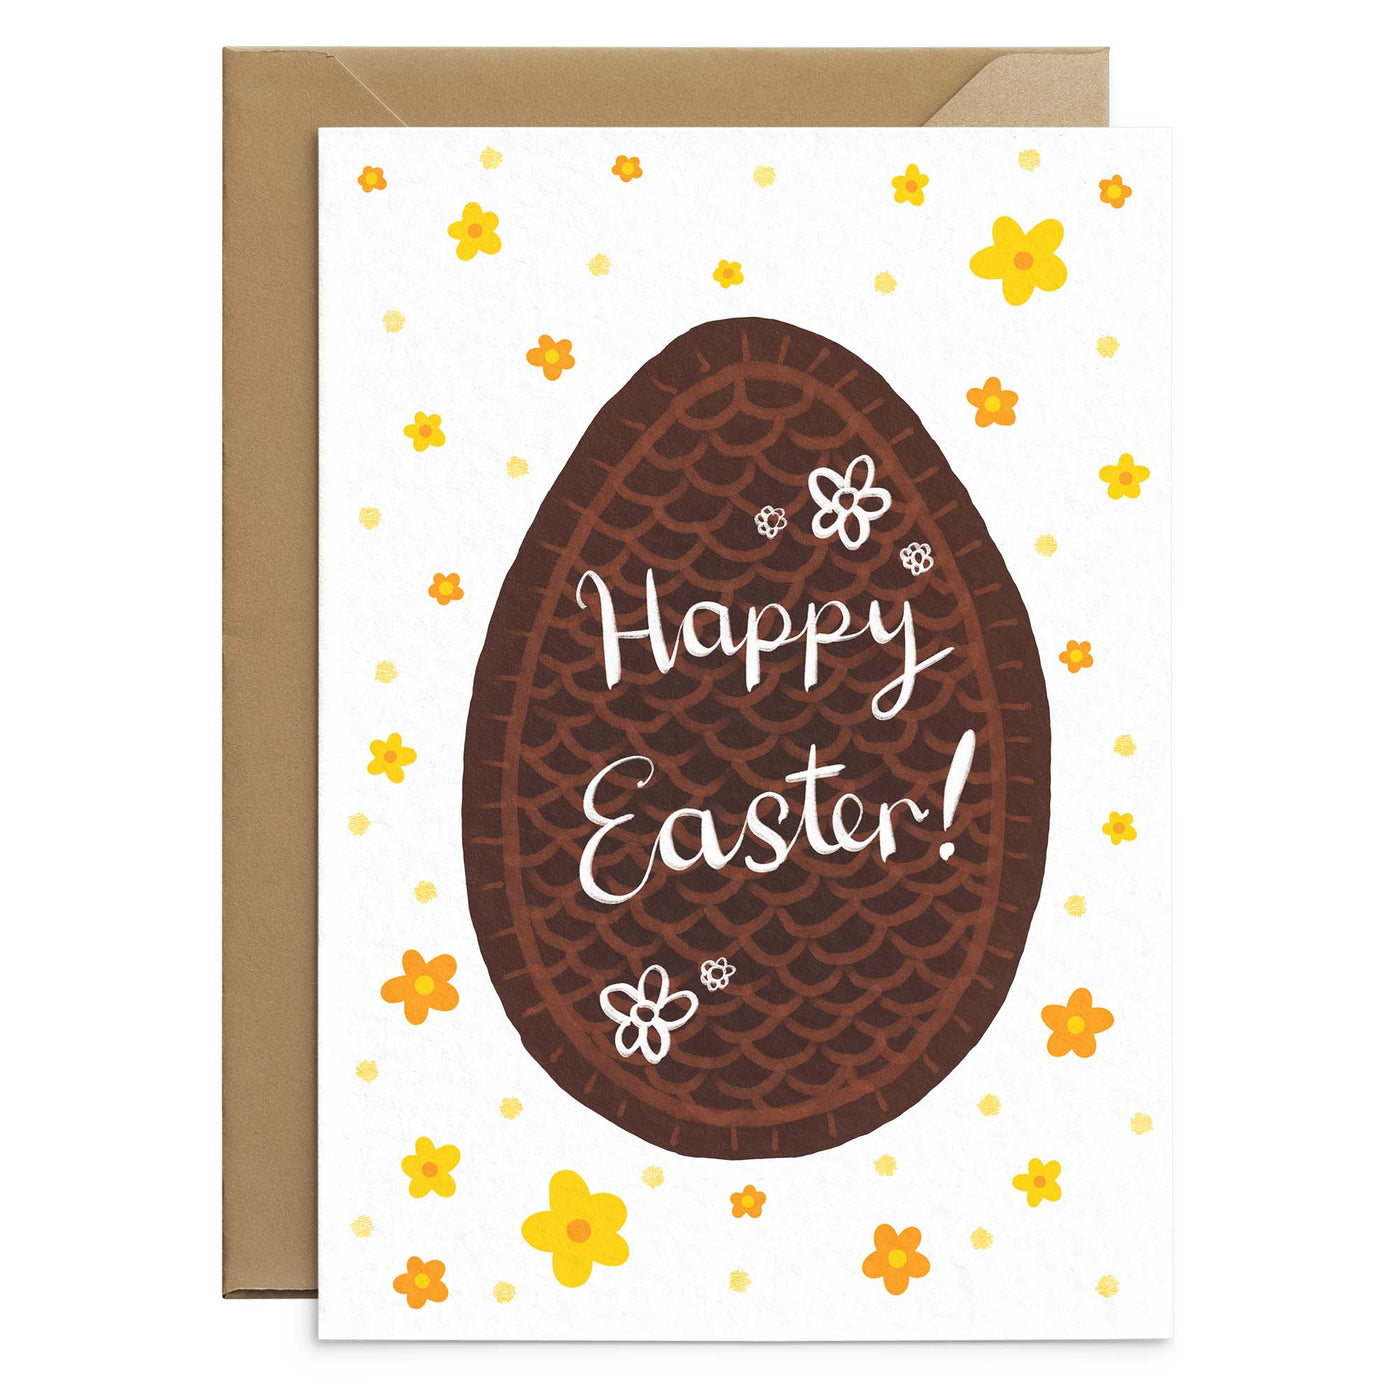 A classic easter greetings card featuring an illustration of a chocolate egg and yellow daisies. Completed by white hand scripted text on the egg illustration that reads 'happy easter'. A white greetings cards laid out on top of a brown recycled envelope. Easter greetings card by Poppins and co.